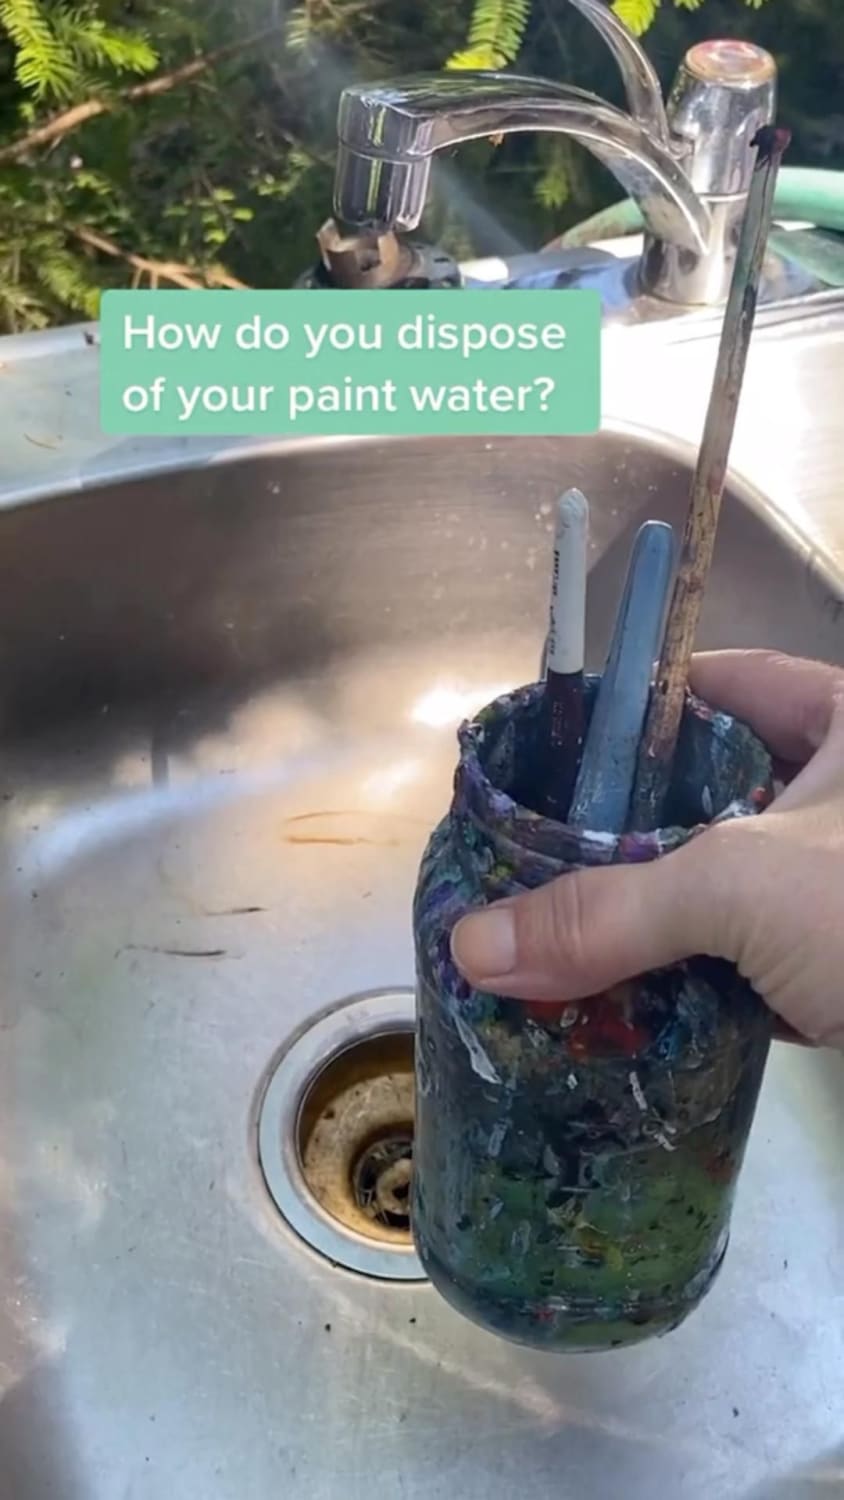 Don’t wash your paint down the sink!